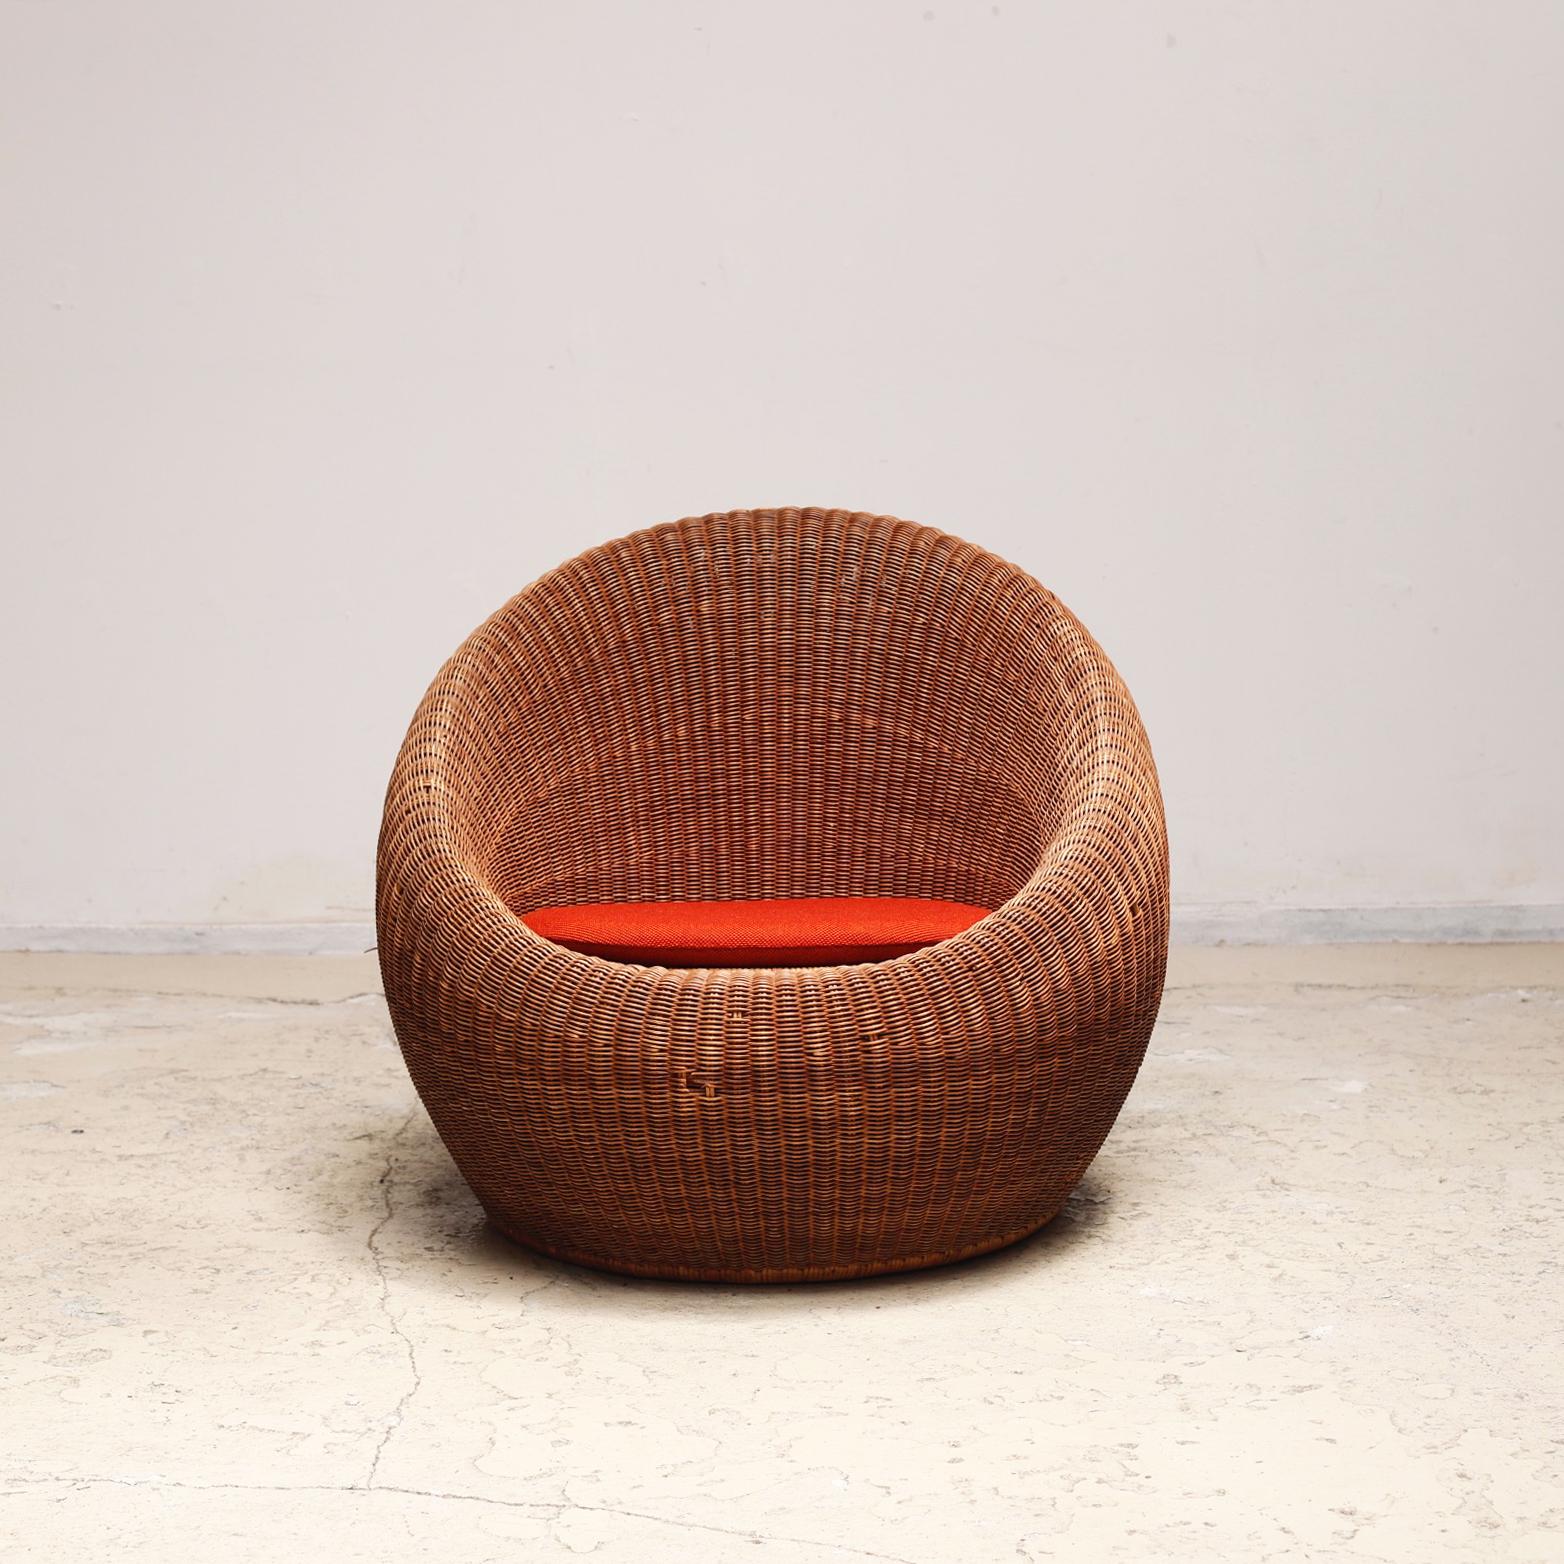 The rattan chair designed by Isamu Kenmochi for the Yamakawa Ratan.
The marks that were burned to bend the rattan.
It can be assumed to have been produced in the 1960s.
This is a very valuable early work.
The manufacturer's seal is still in